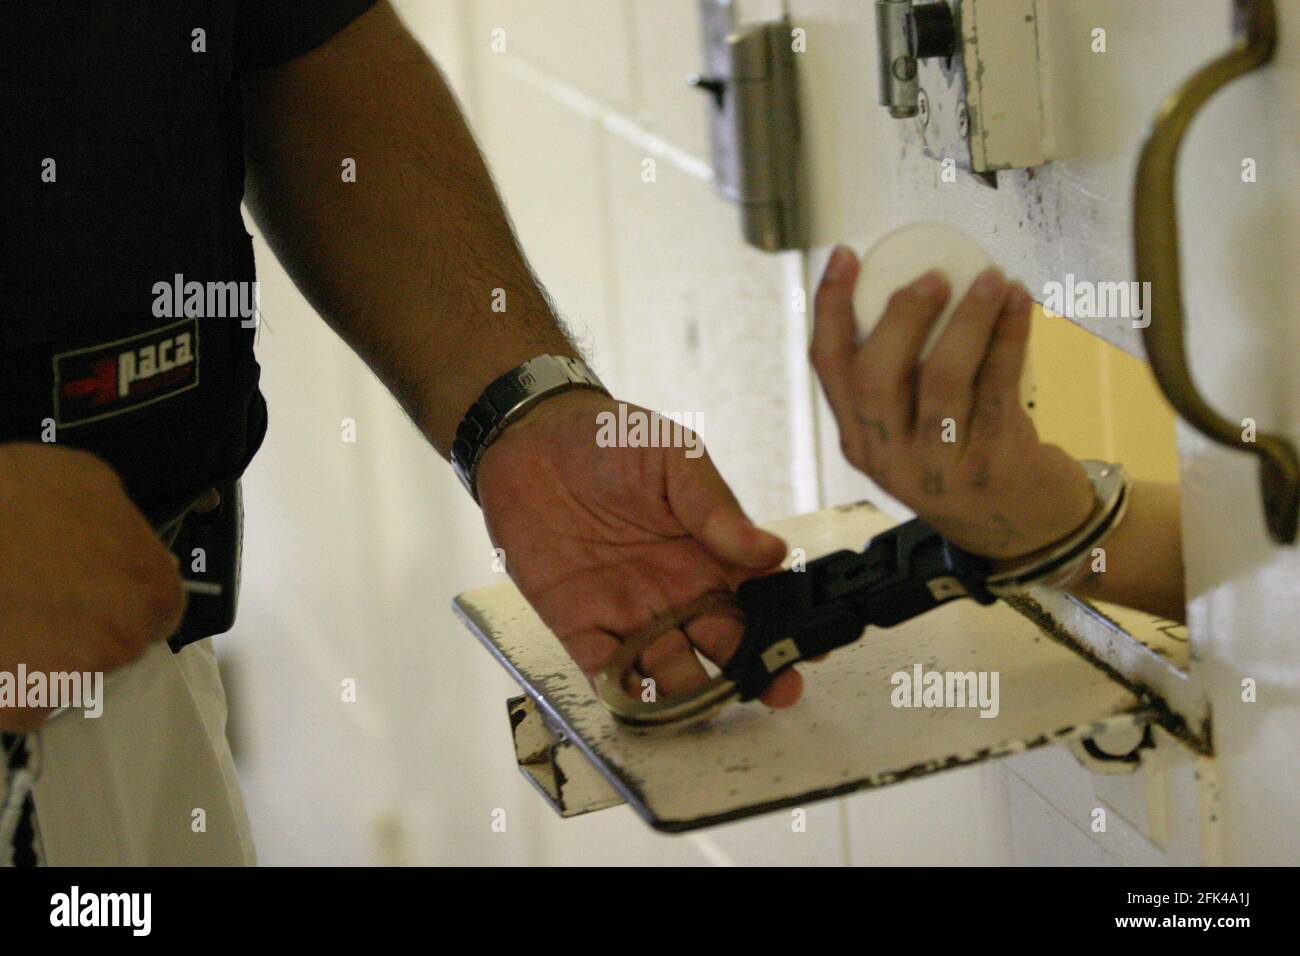 STOCKTON, UNITED STATES - Jul 27, 2004: Inmate cuffed at the cell door in a maximum-security  correctional facility in Stockton, California Stock Photo